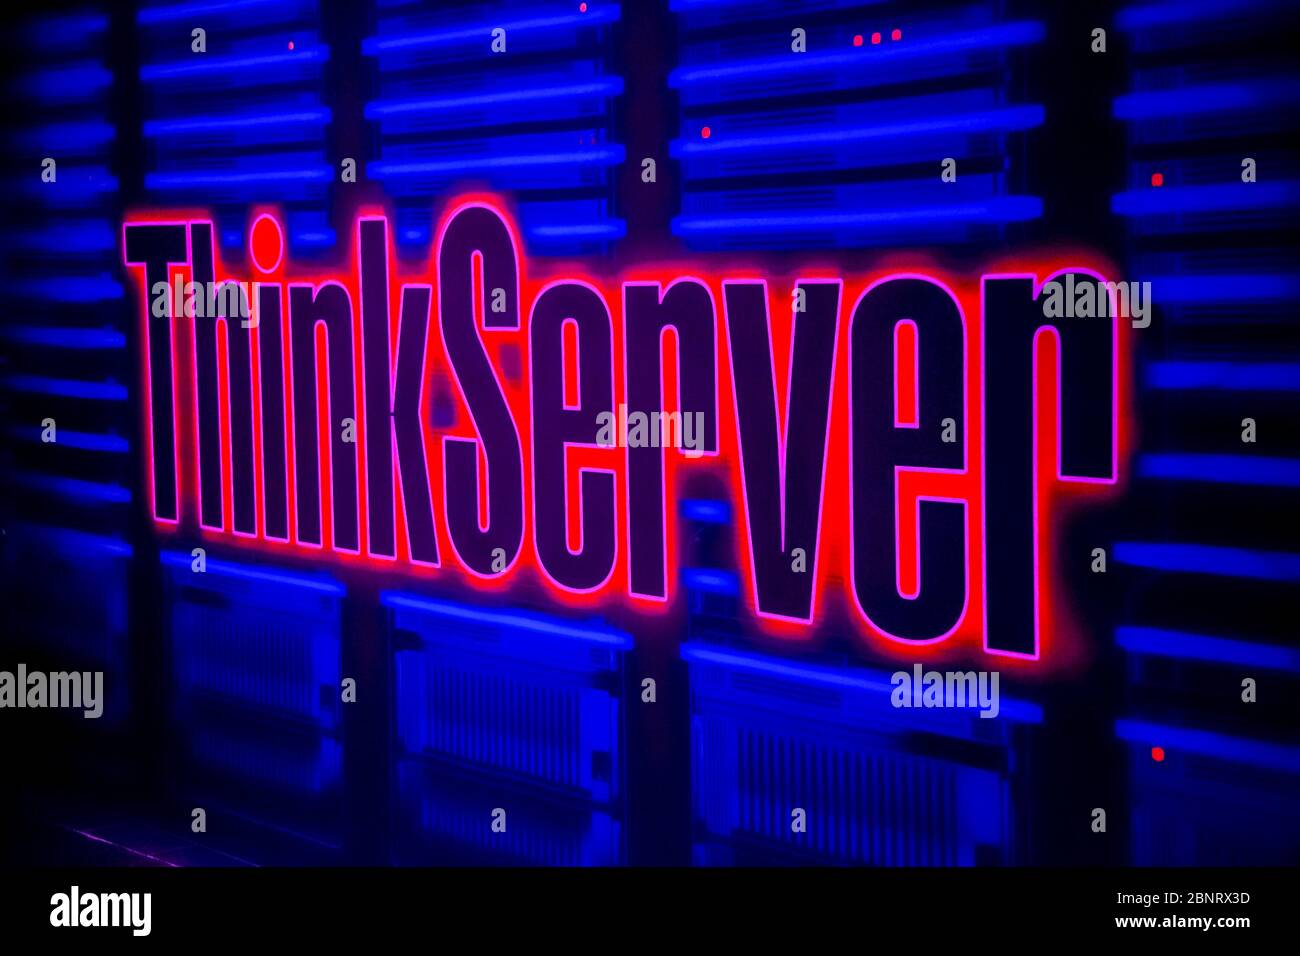 Johannesburg, South Africa - May 7, 2015: Inside Interior of a Lenovo ThinkServer media launch event Stock Photo